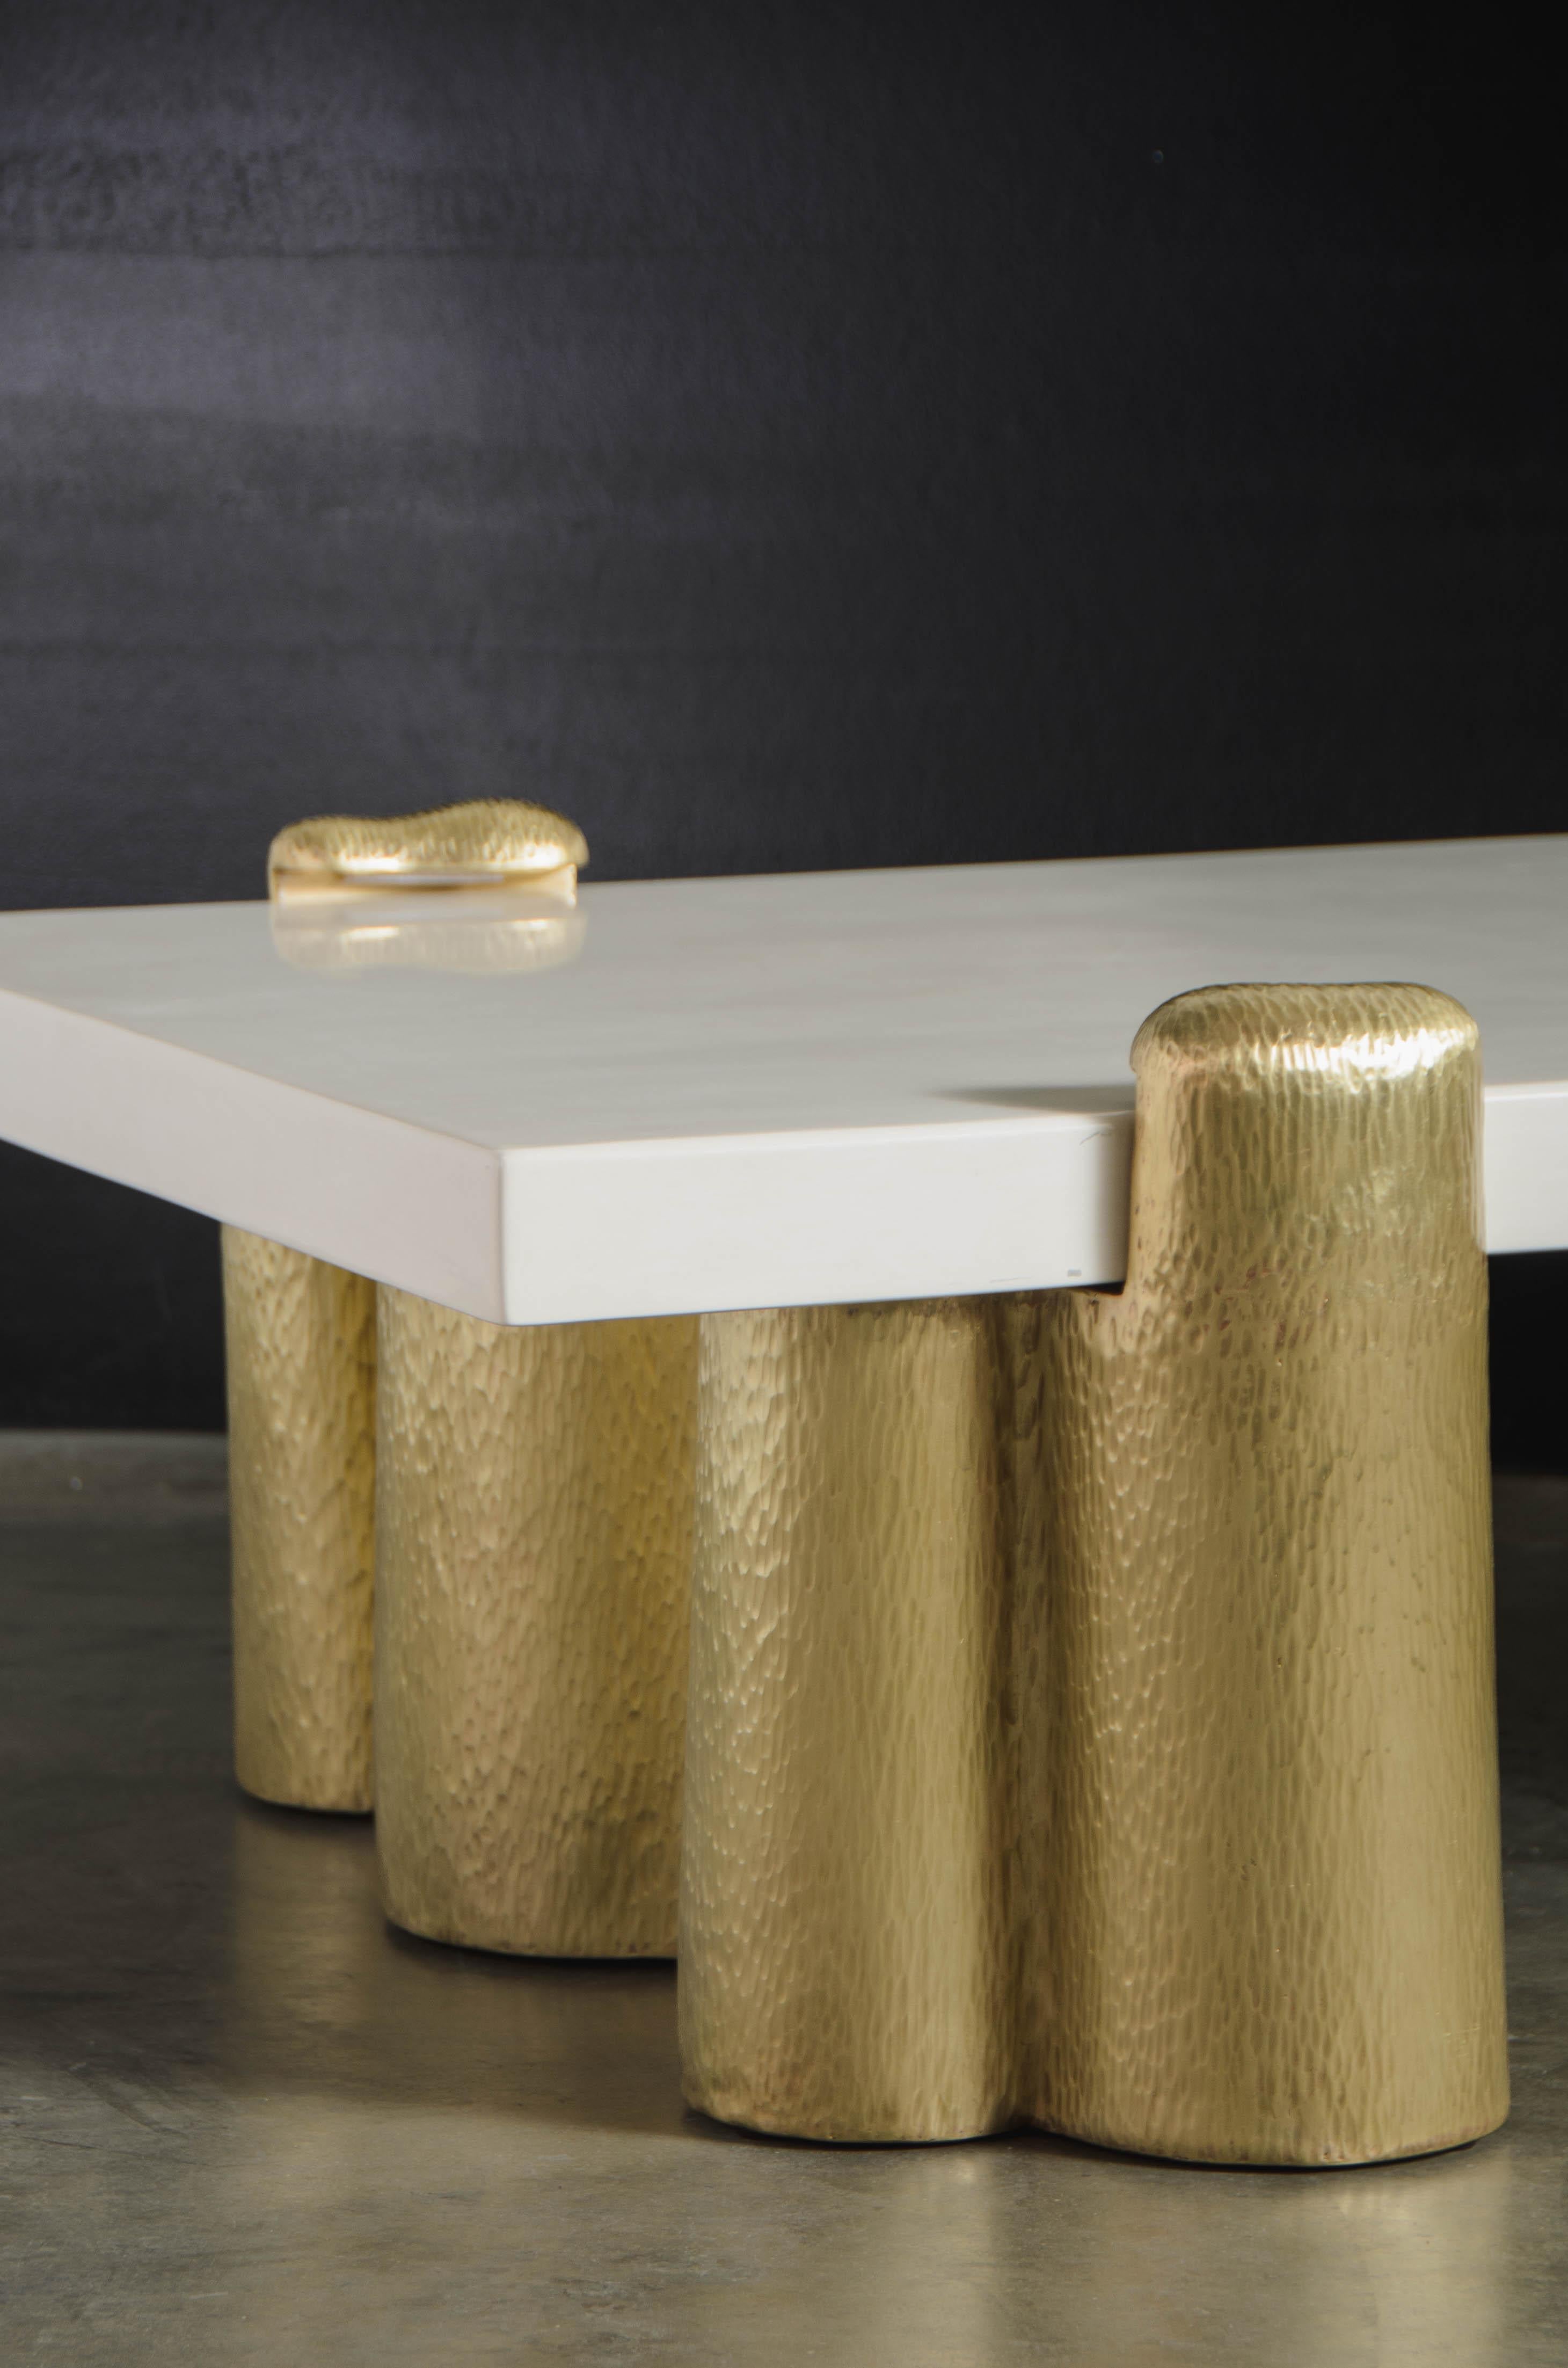 Repoussé Brass Root Design Cocktail Table Base with Cream Lacquer Top by Robert Kuo For Sale